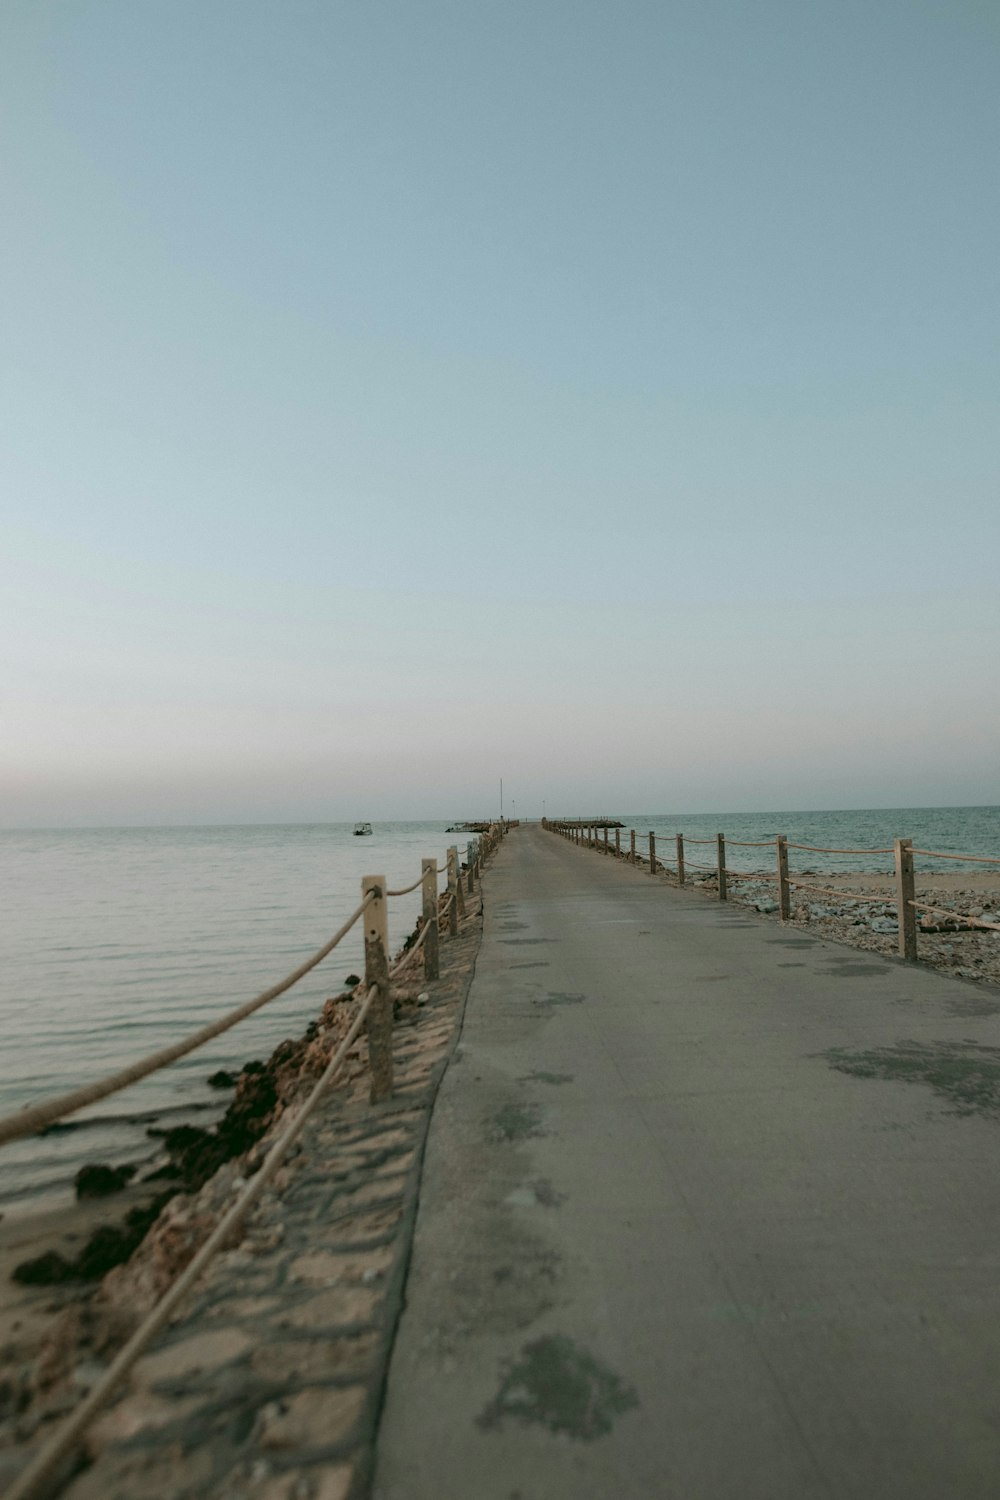 a long wooden walkway next to the ocean